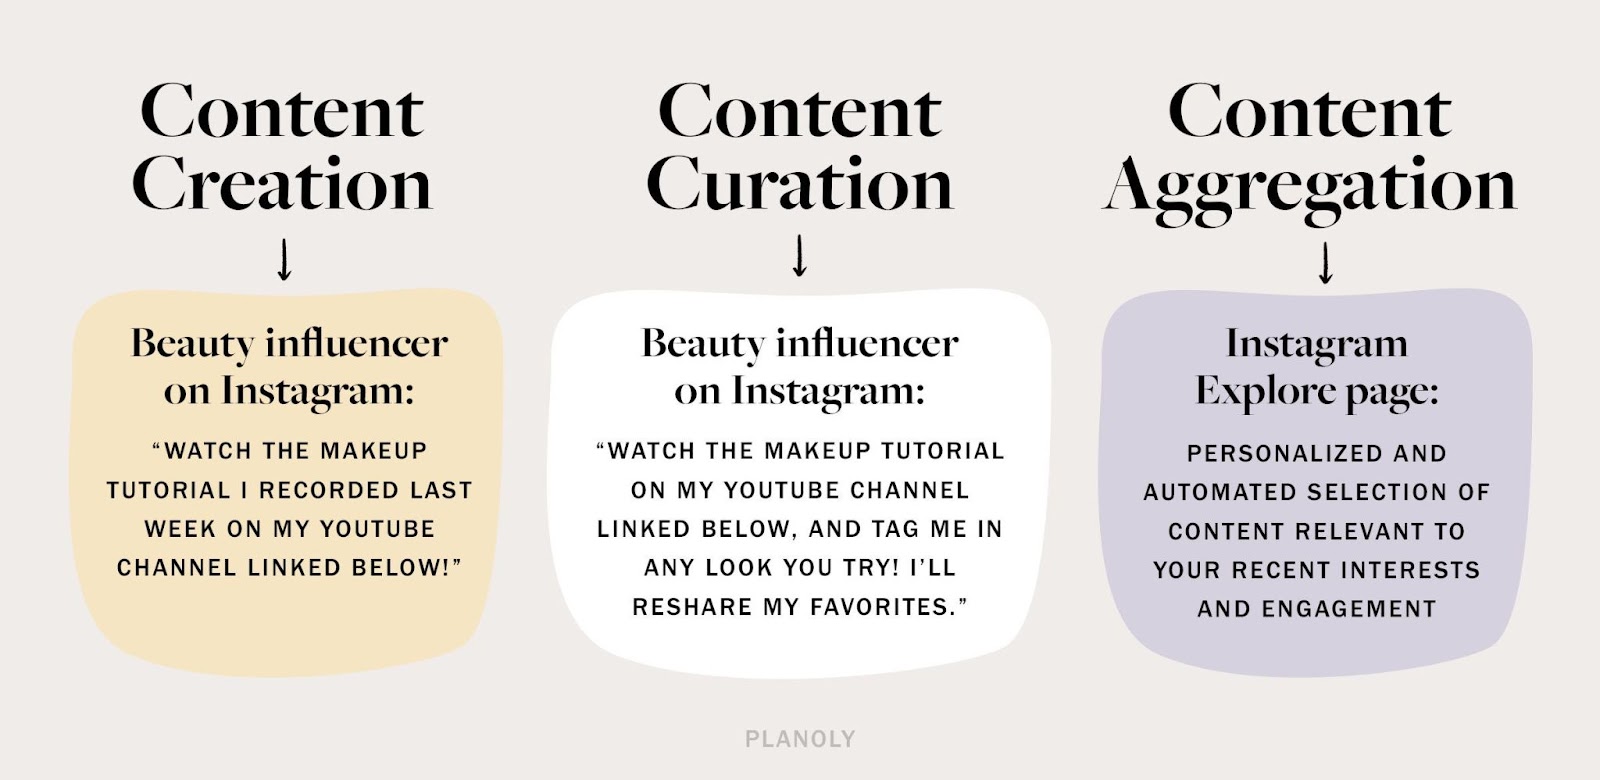 An infographic showing how a beauty influencer would use the three types of content creation: normal content creation, content curation and content aggregation.